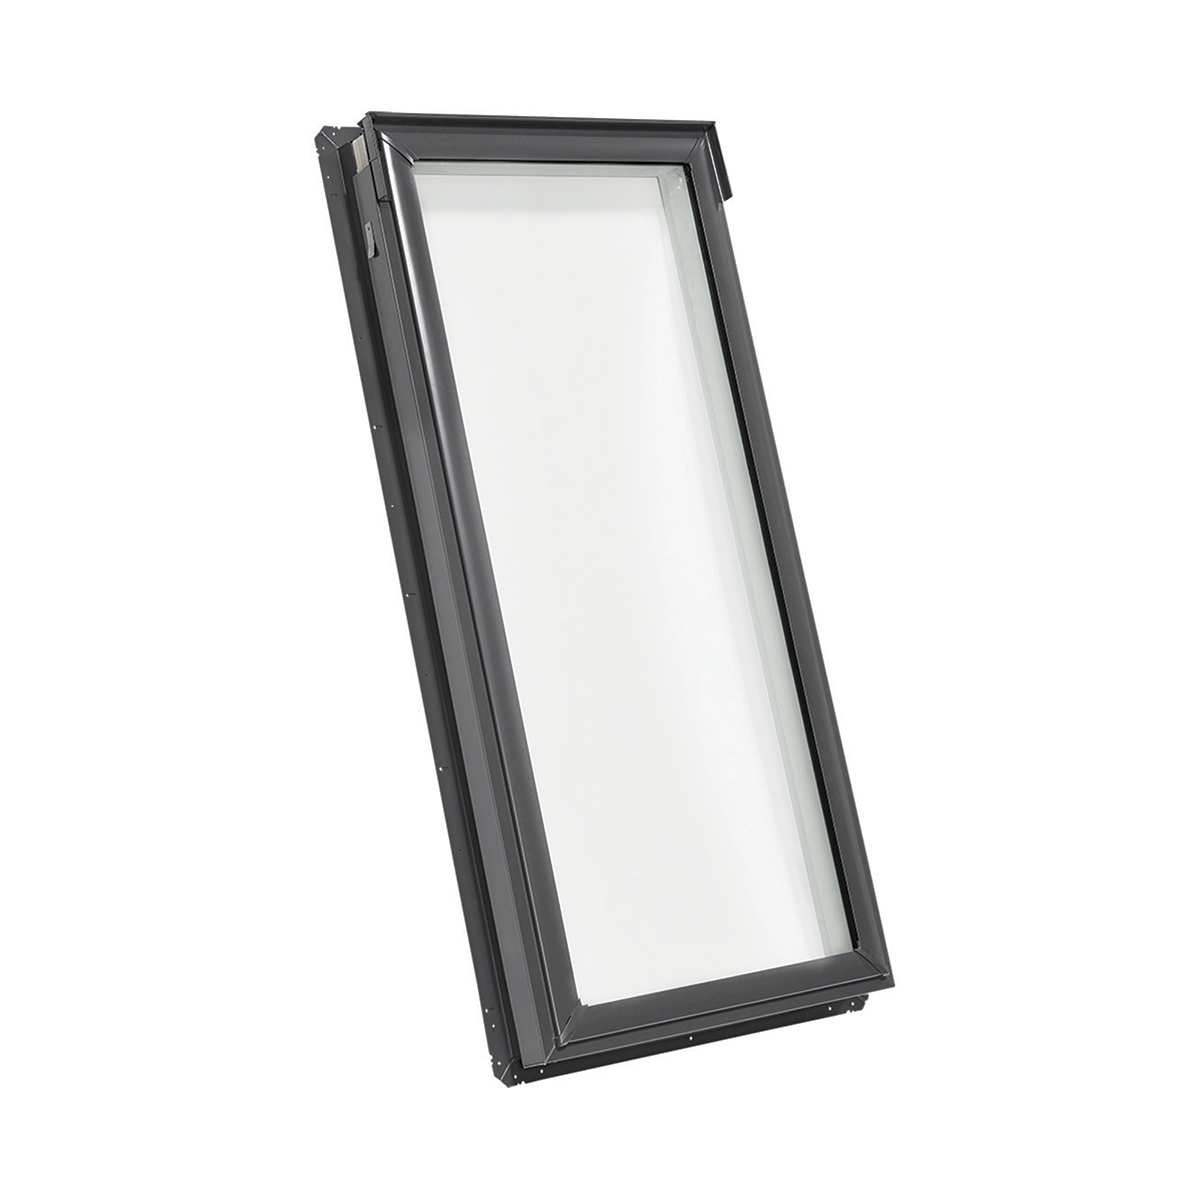 Fixed Deck-Mount Skylight with Laminated Low-E3 Glass - 22-1/2 in. x 45-3/4 in. - FS D06